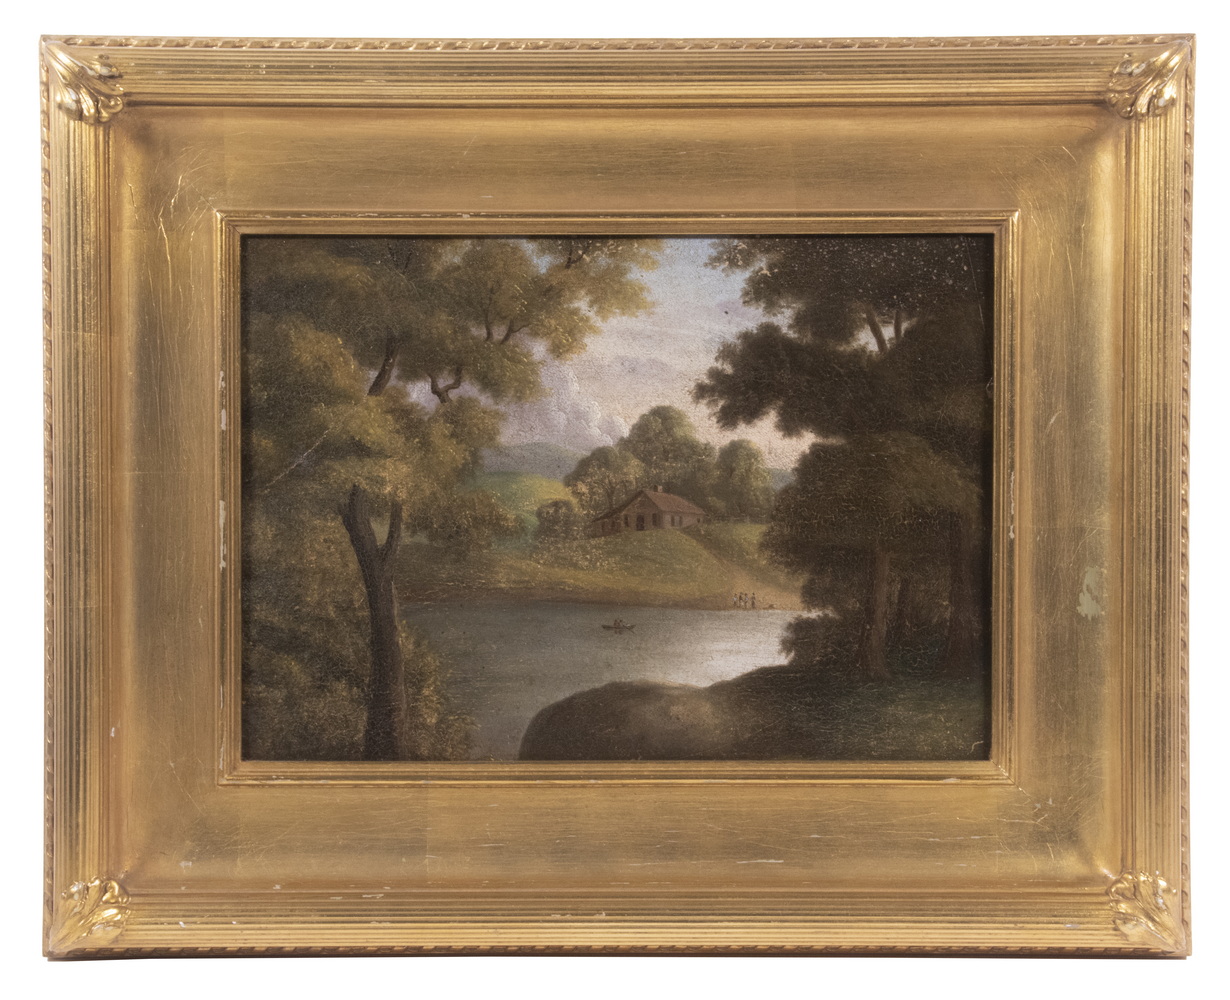 UNSIGNED MID 19TH C FRONTIER LANDSCAPE 3021cb